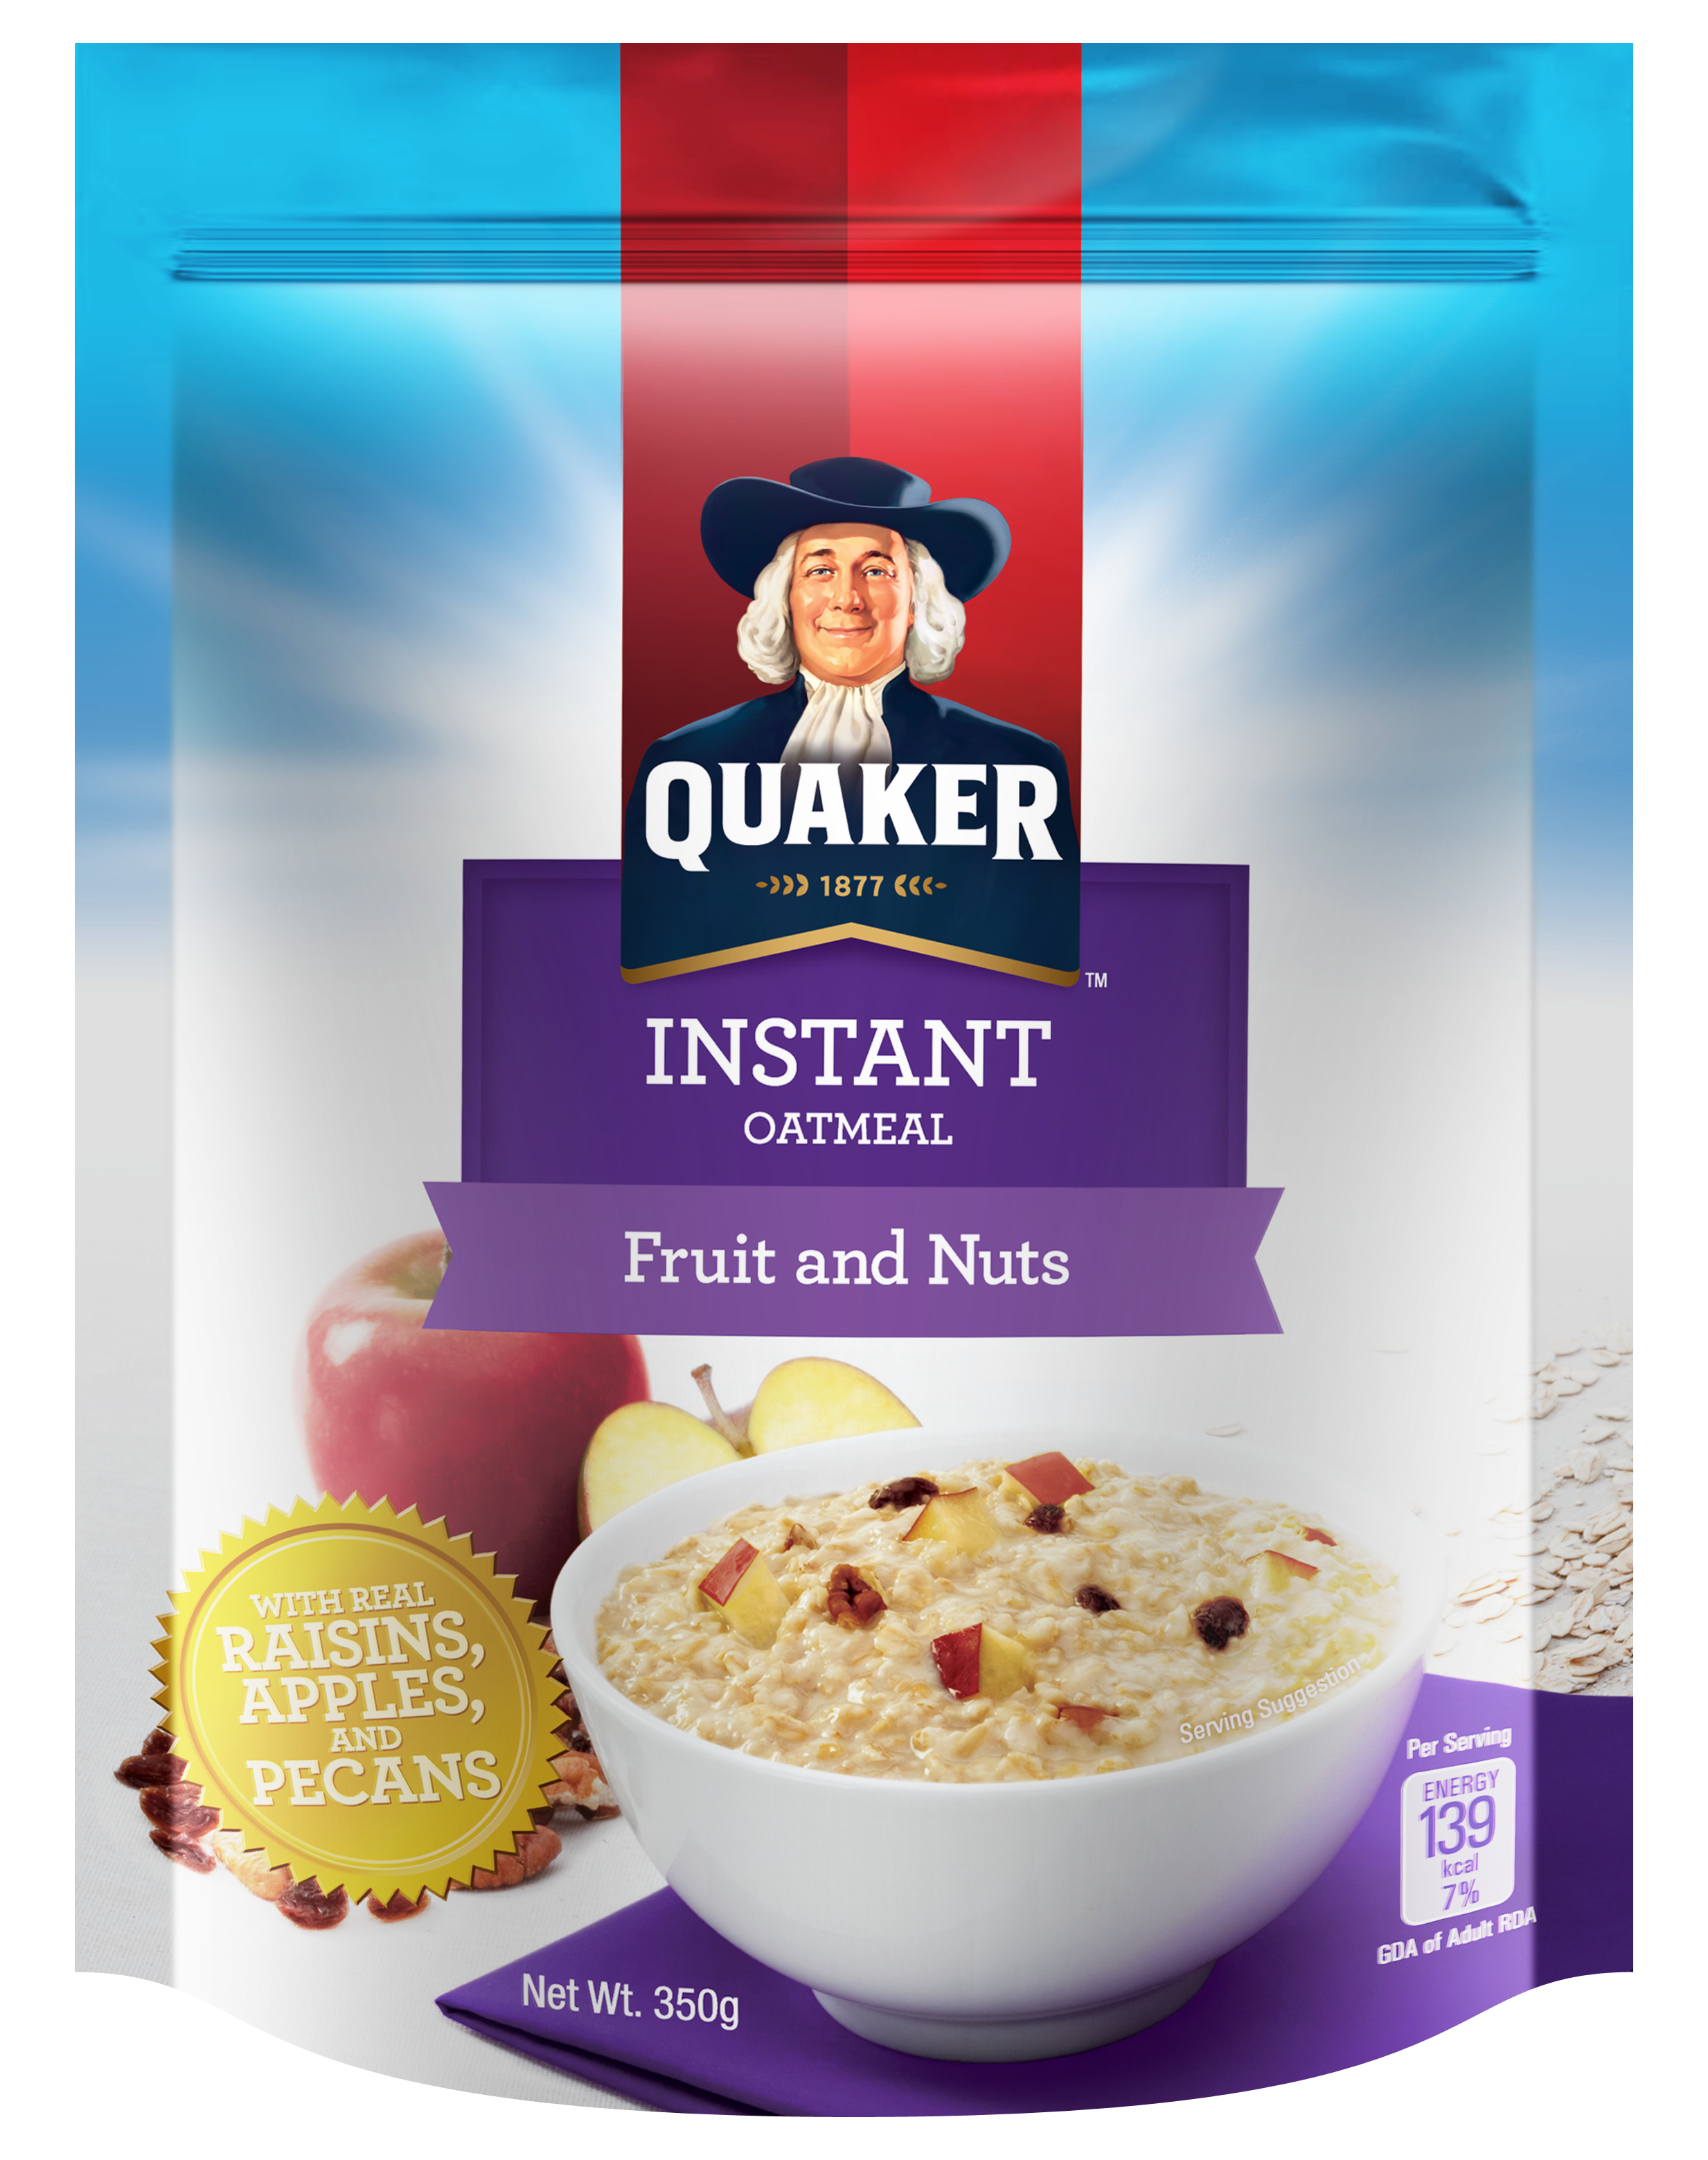 oatmeal clipart cold cereal